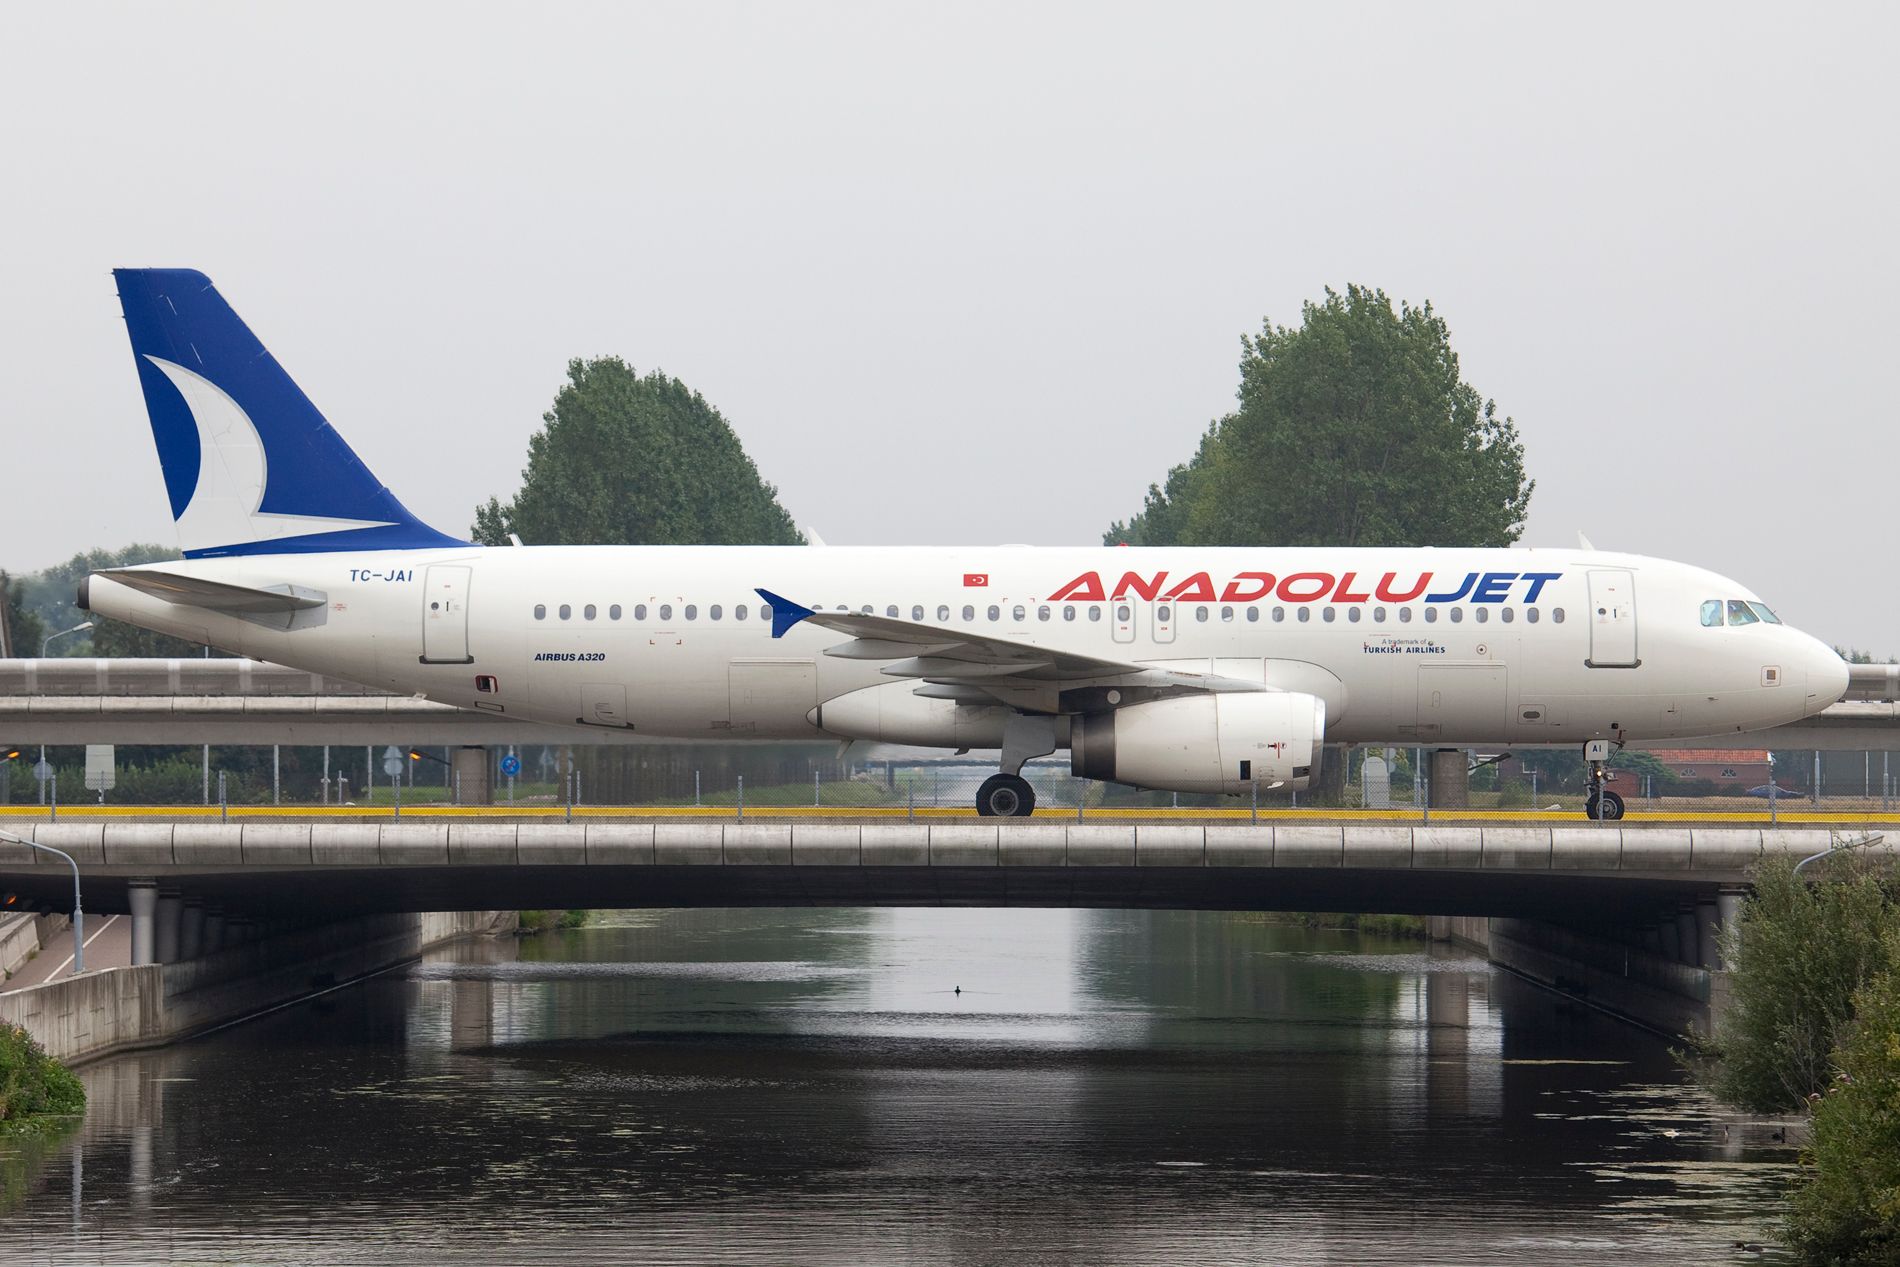 Anadoulujet Airbus A320 on the ground